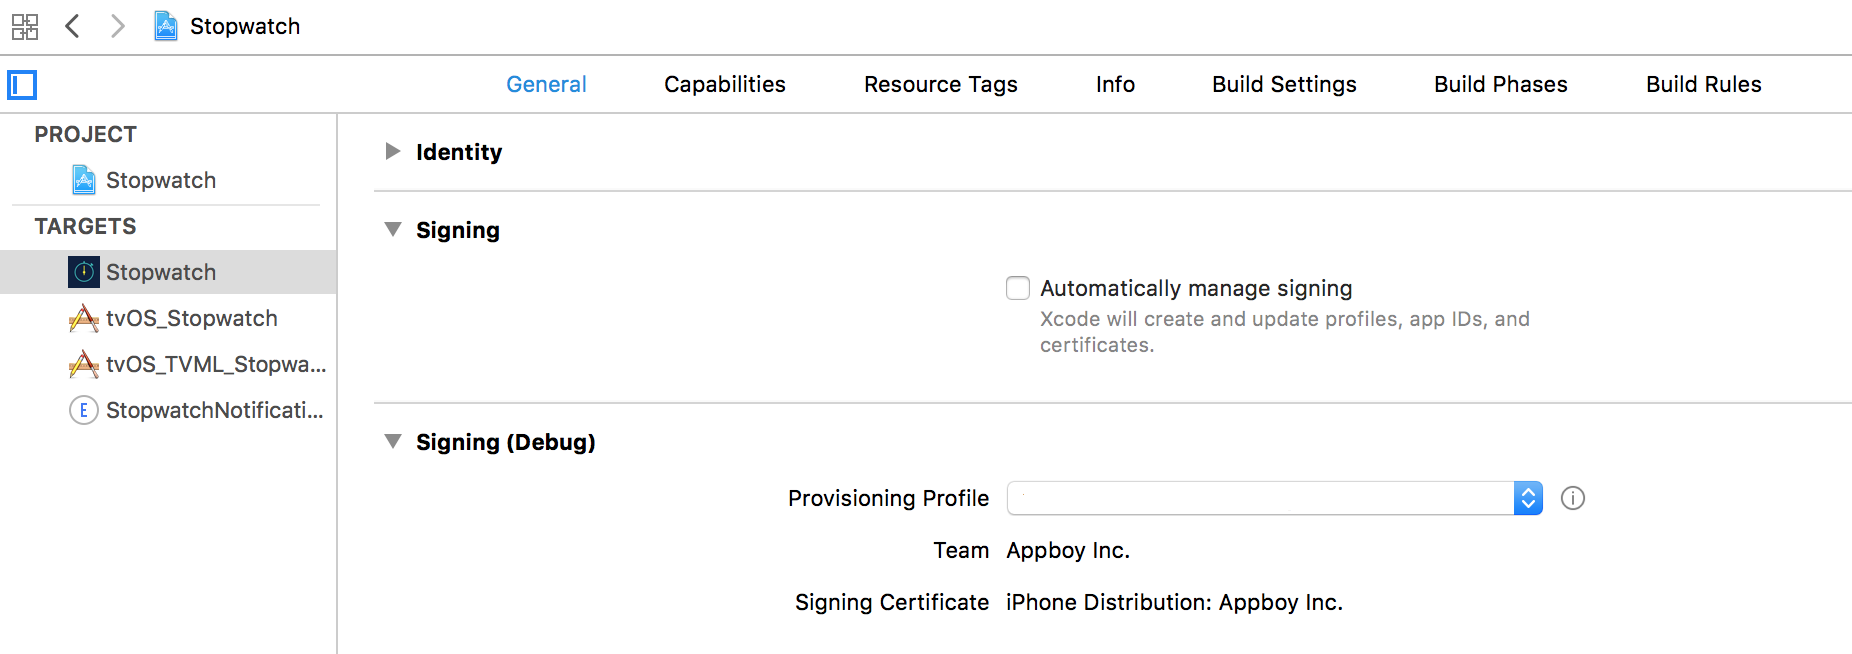 Xcode project settings showing the "general" tab. In this tab, the option "Automatically manage signing" is unchecked.